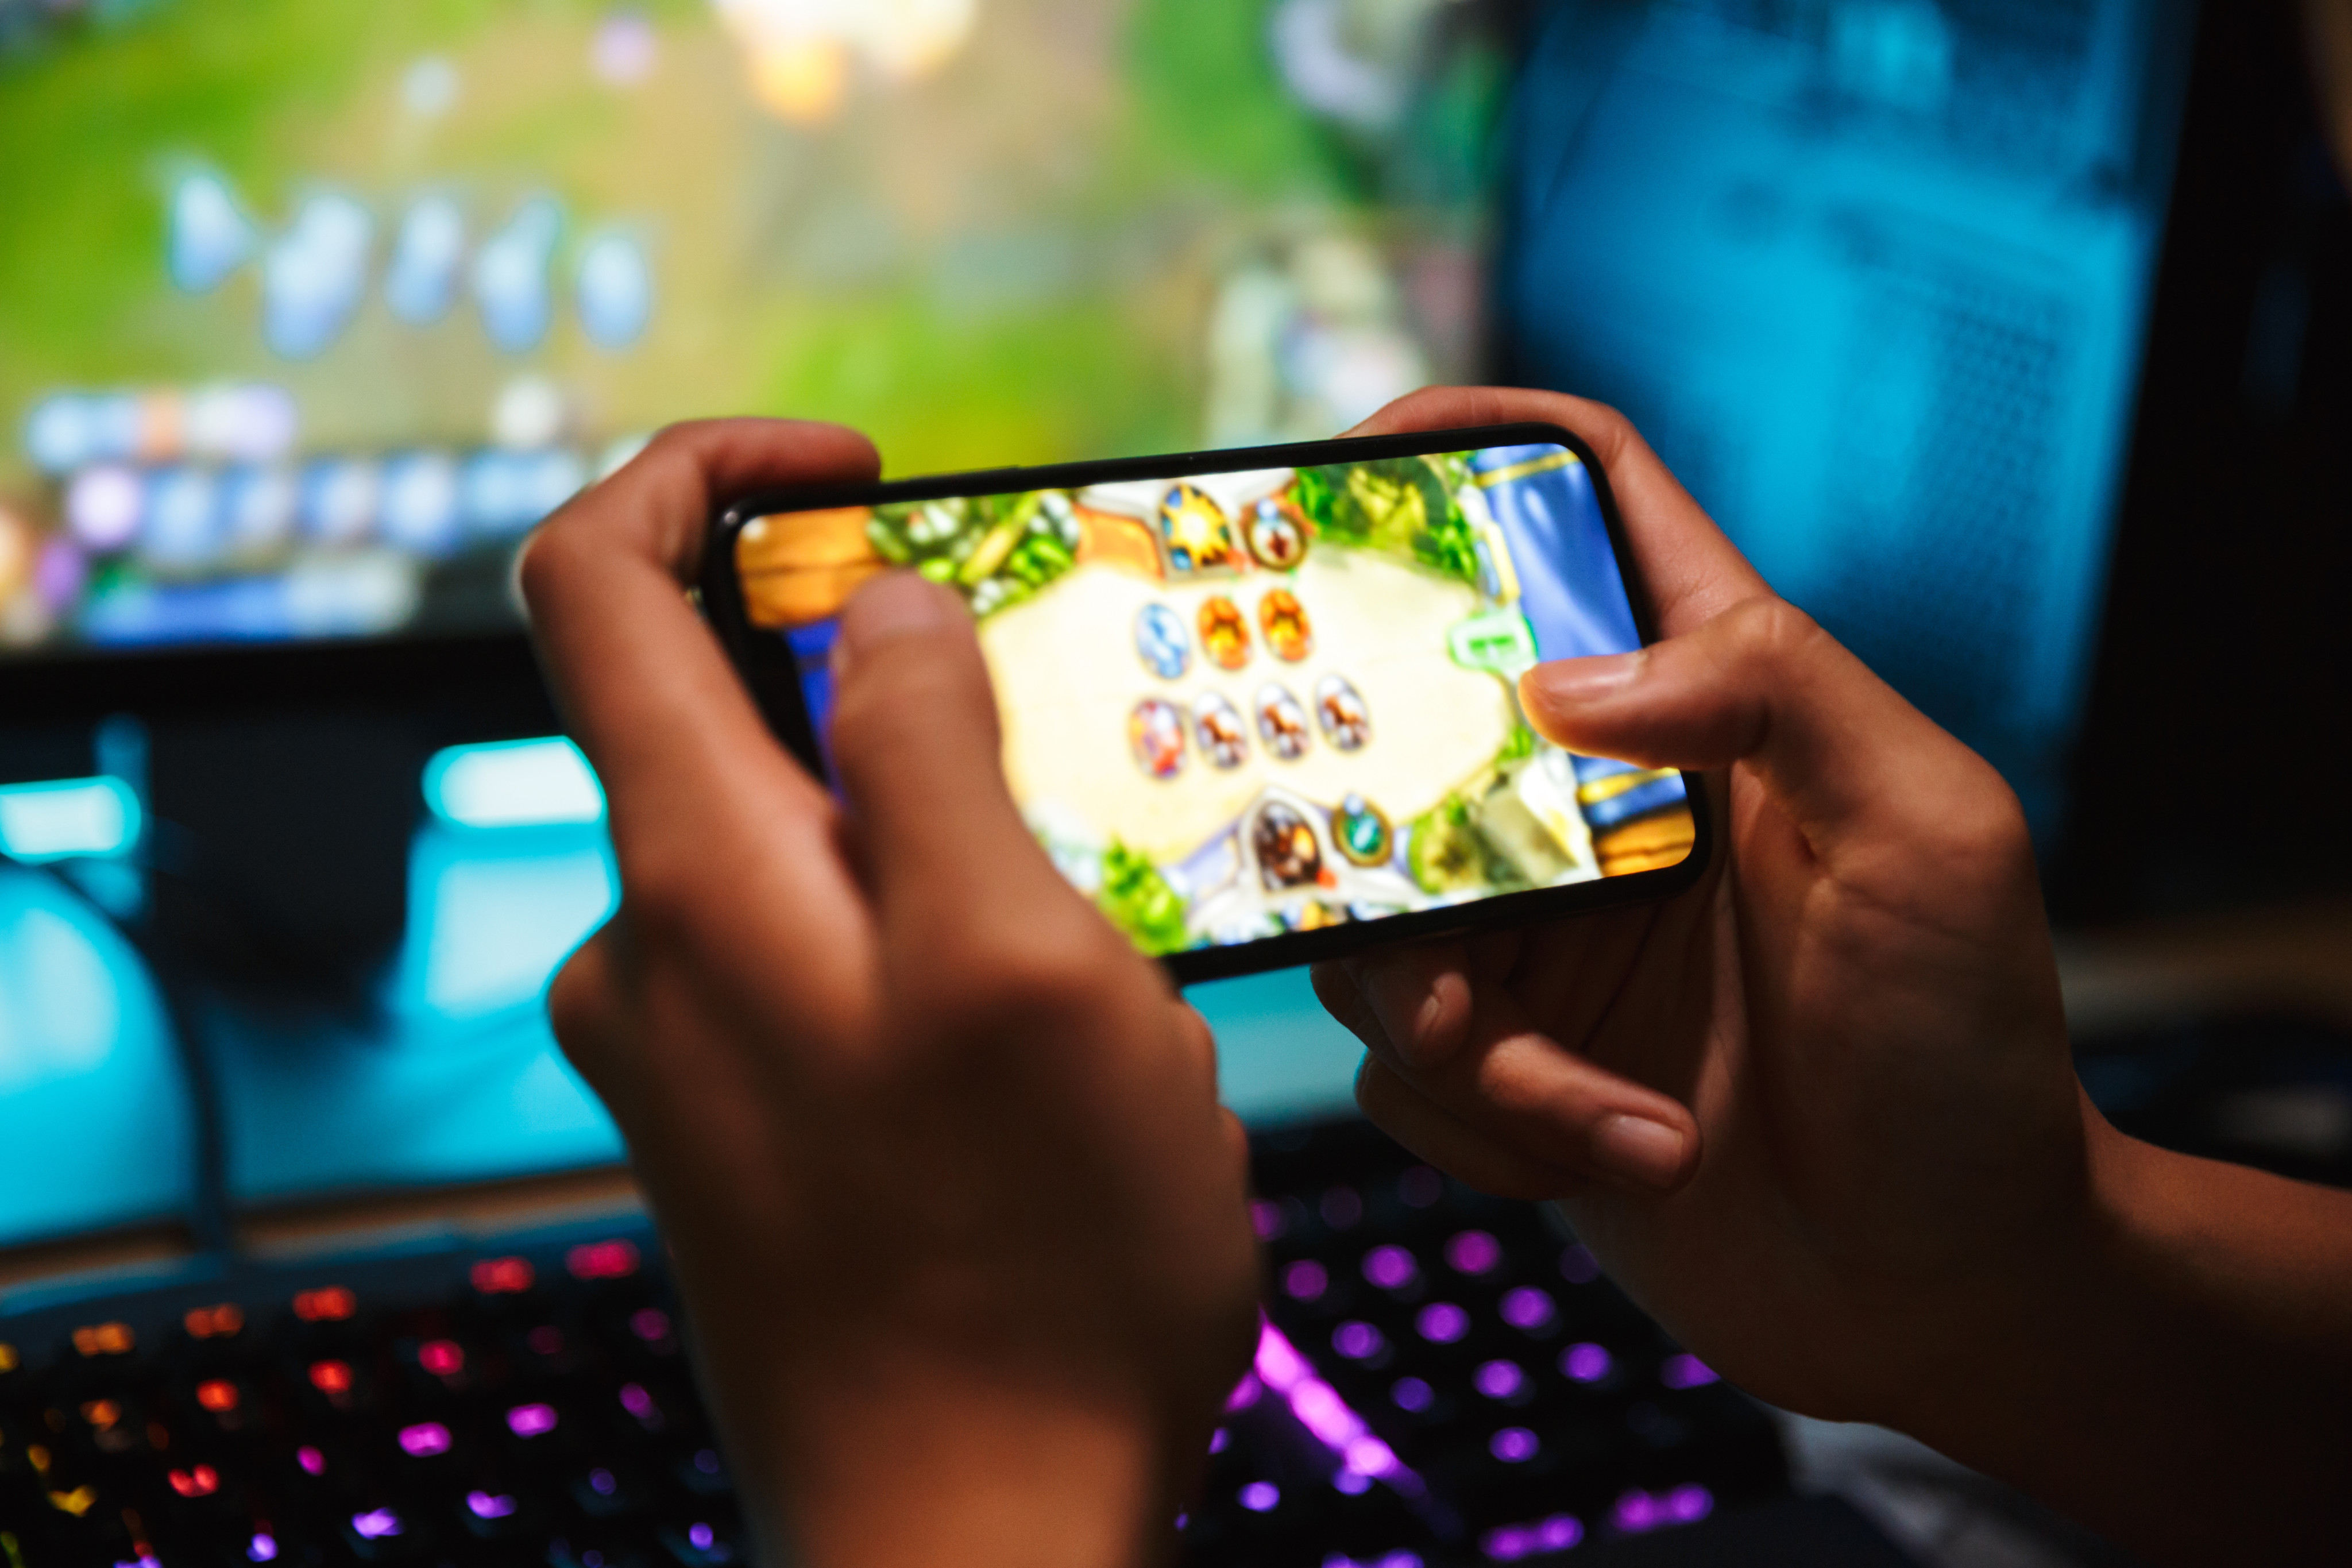 Researchers found that China’s video game restrictions for minors have not curbed playing time. Photo: Shutterstock